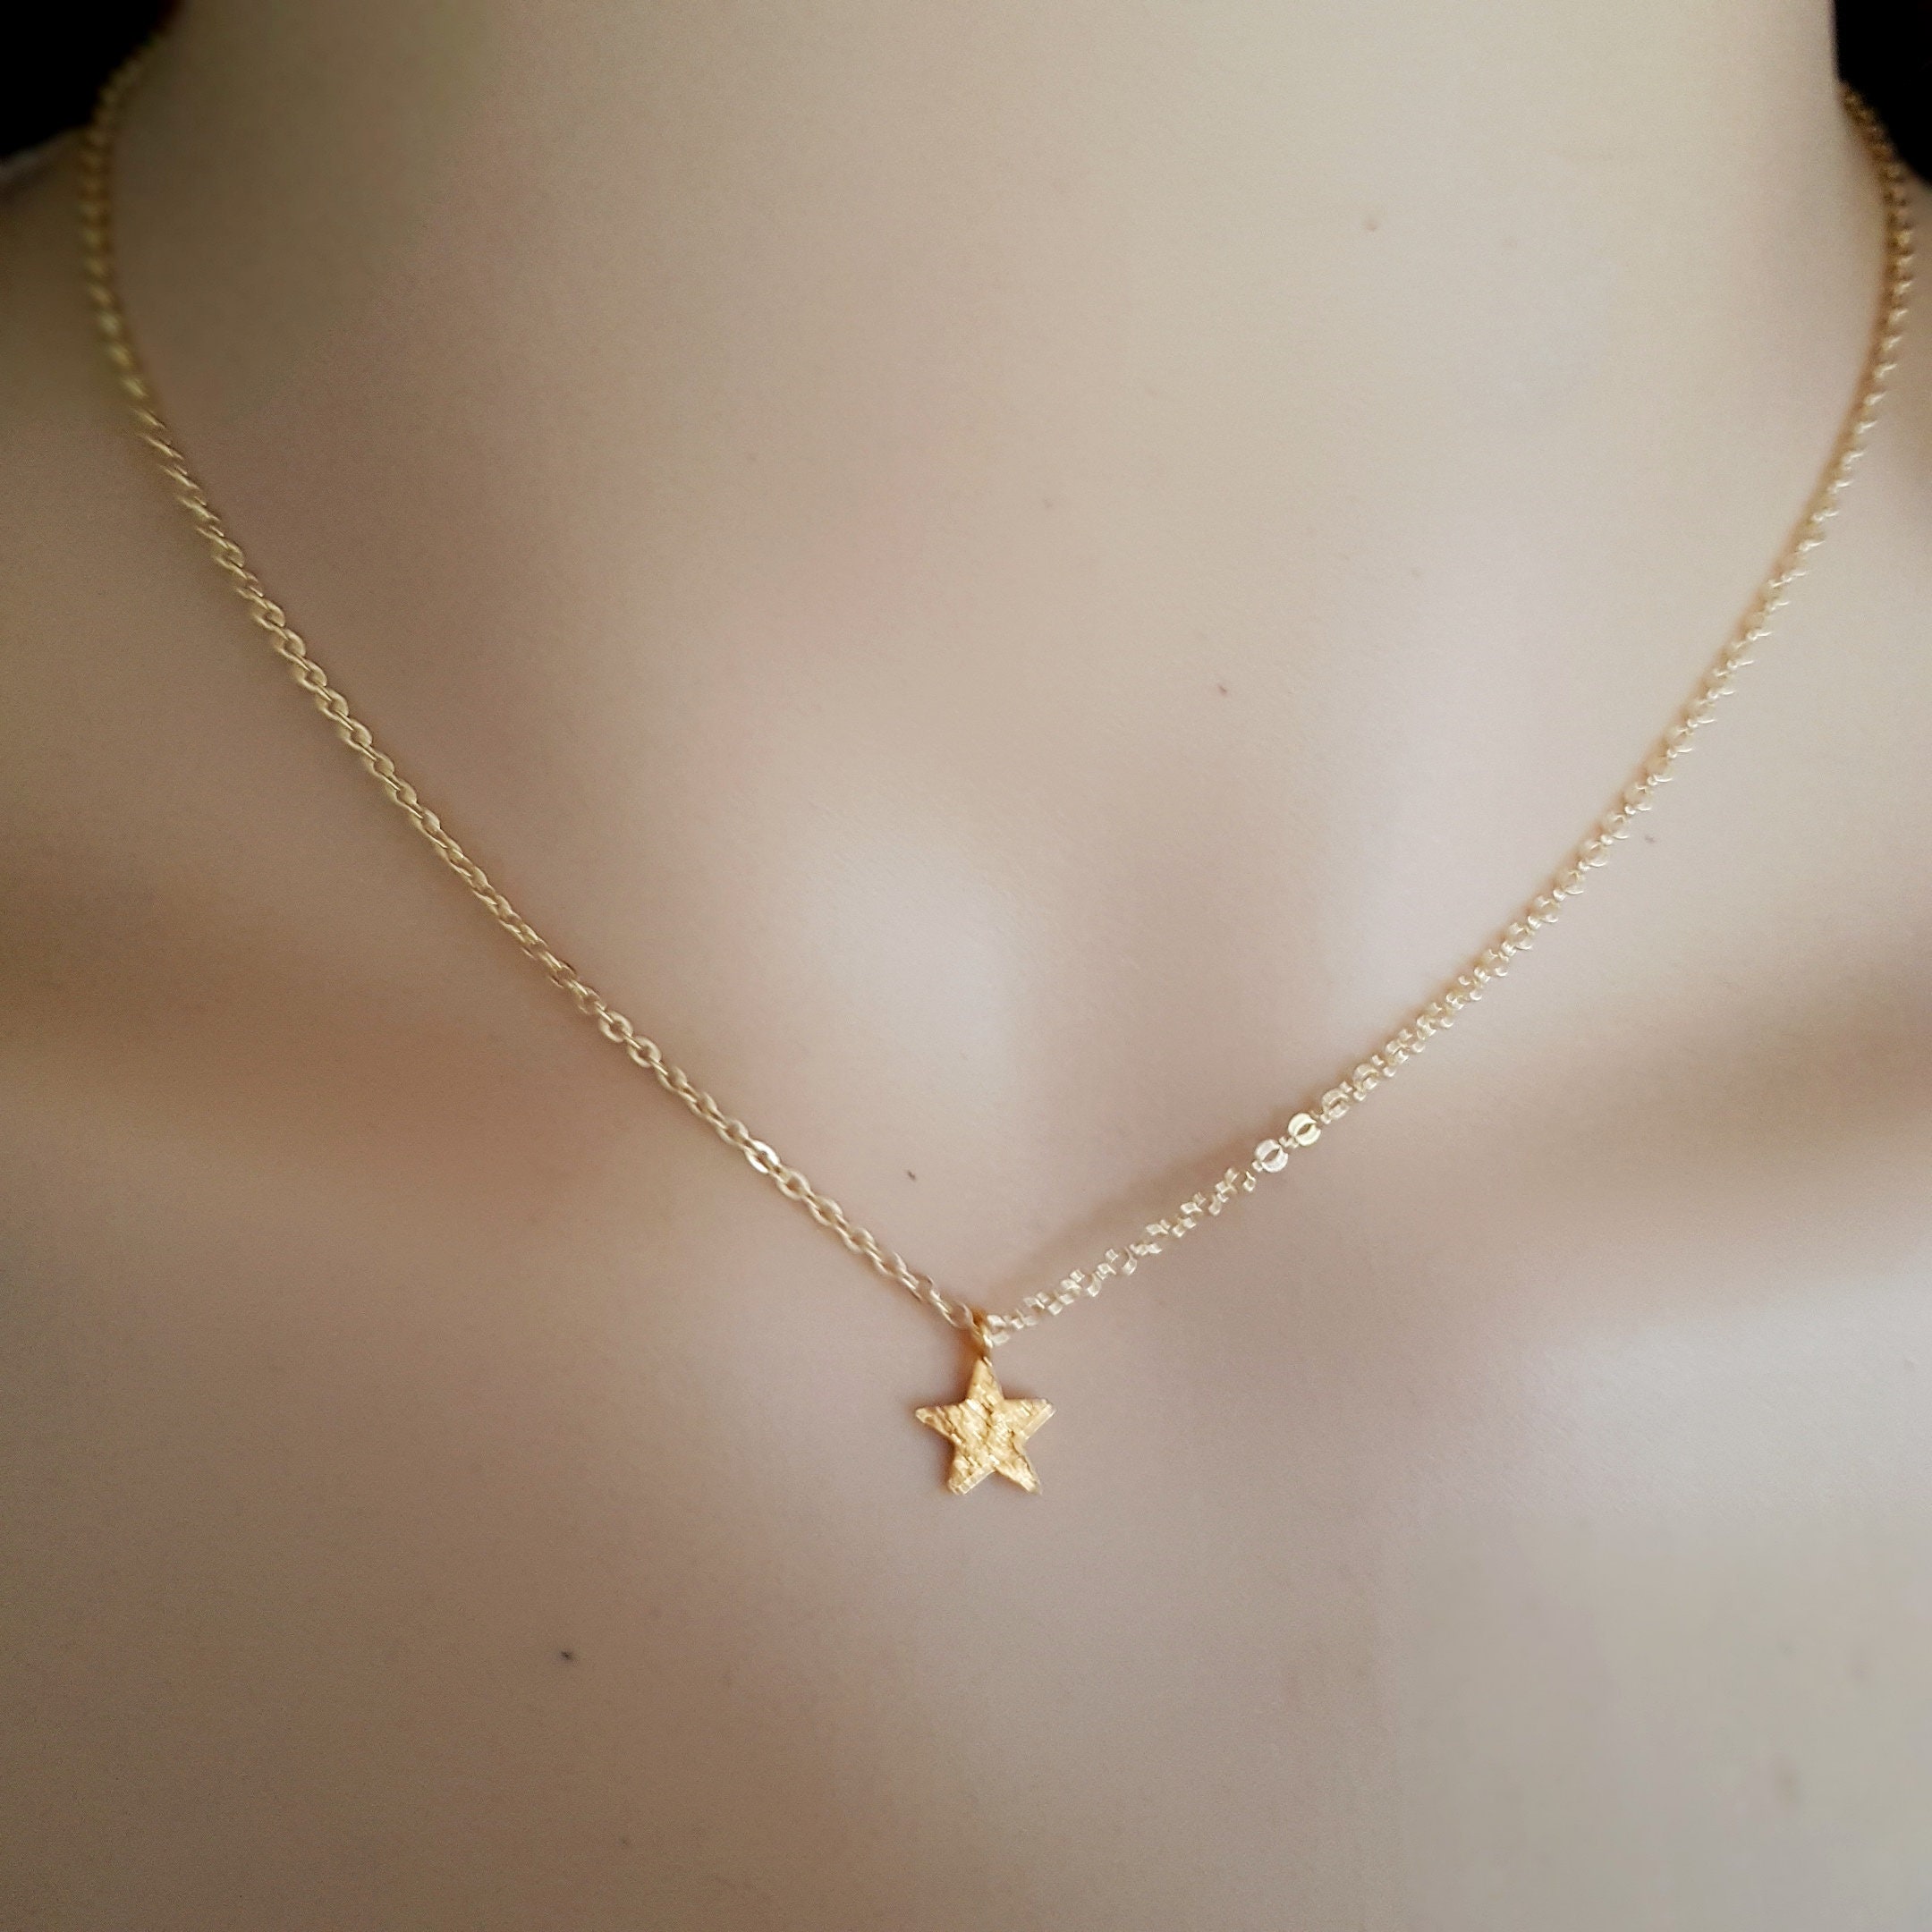 Tiny 24K Gold star necklace choker small Gold filled star | Etsy